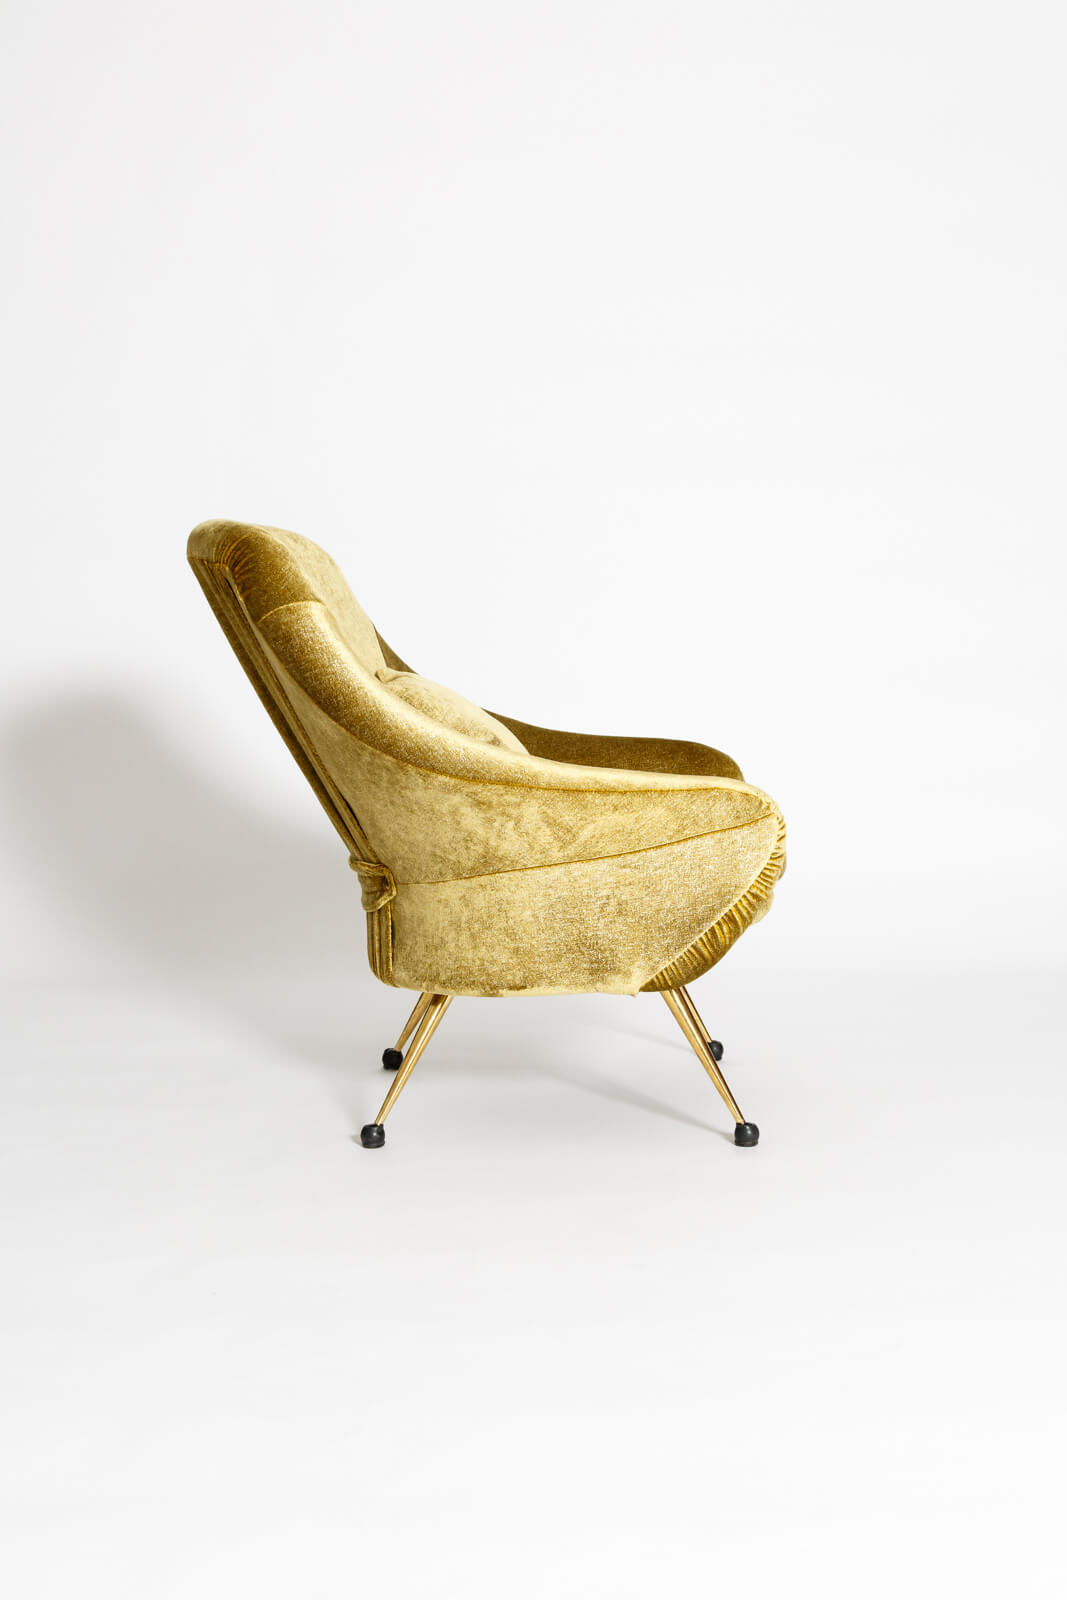 Armchair Martingala by Marco Zanuso for sale